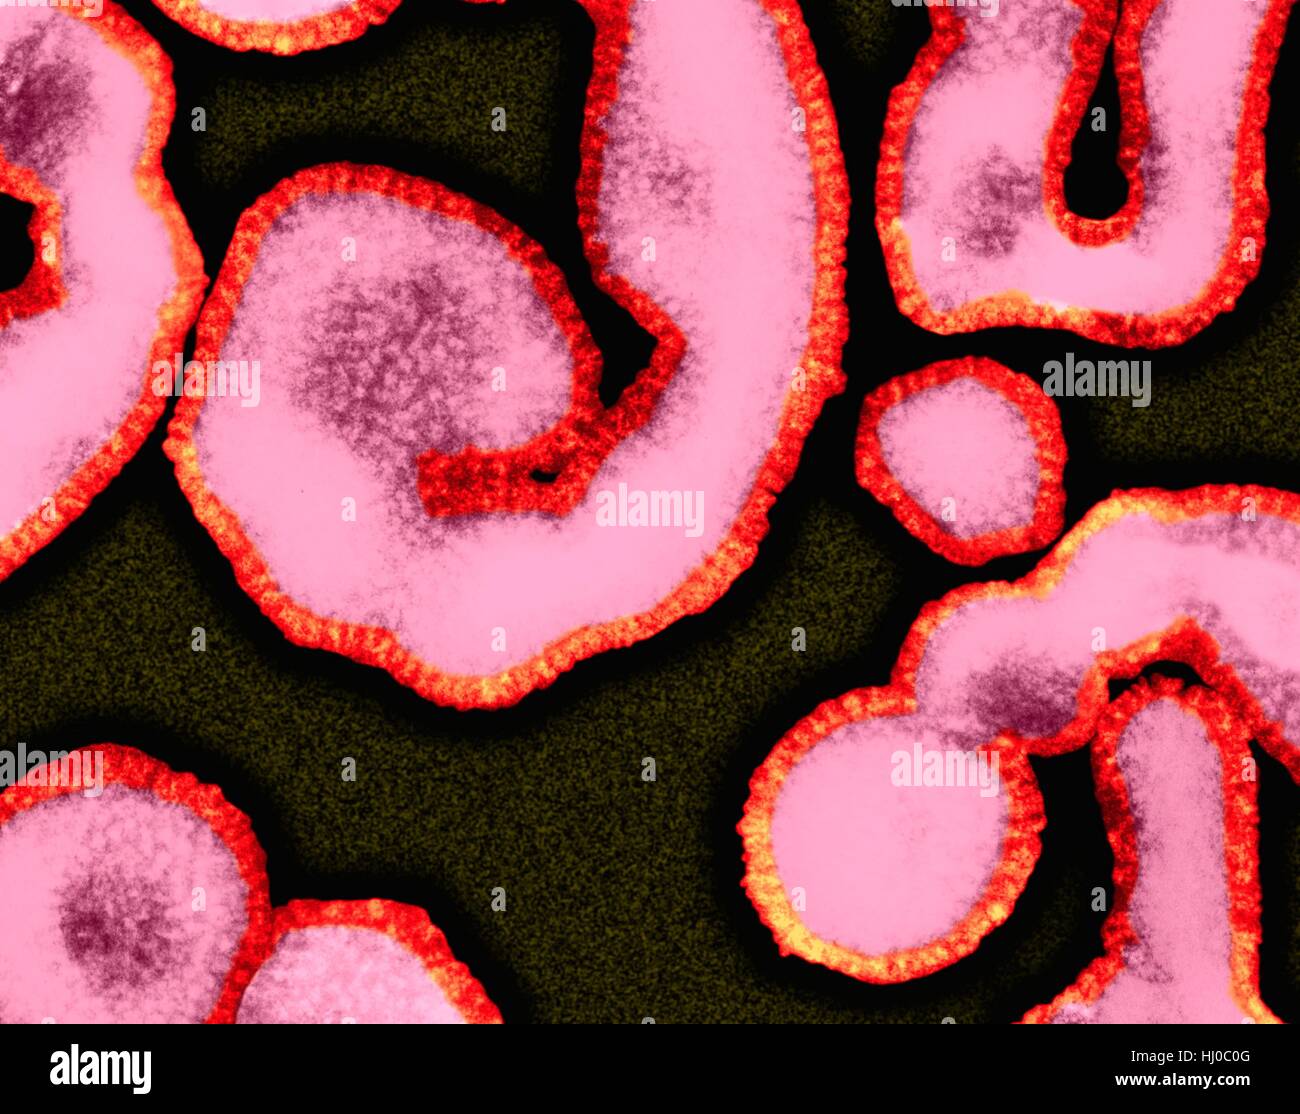 Influenza virus (RNA virus,Orthomyxoviridae Family),coloured transmission electron micrograph (TEM).'Influenza Virus',often know as 'The Flu Virus' often changes or mutates,complicating development of suitable vaccines for all strains.As result,epidemics or even occasional pandemics of influenza Stock Photo